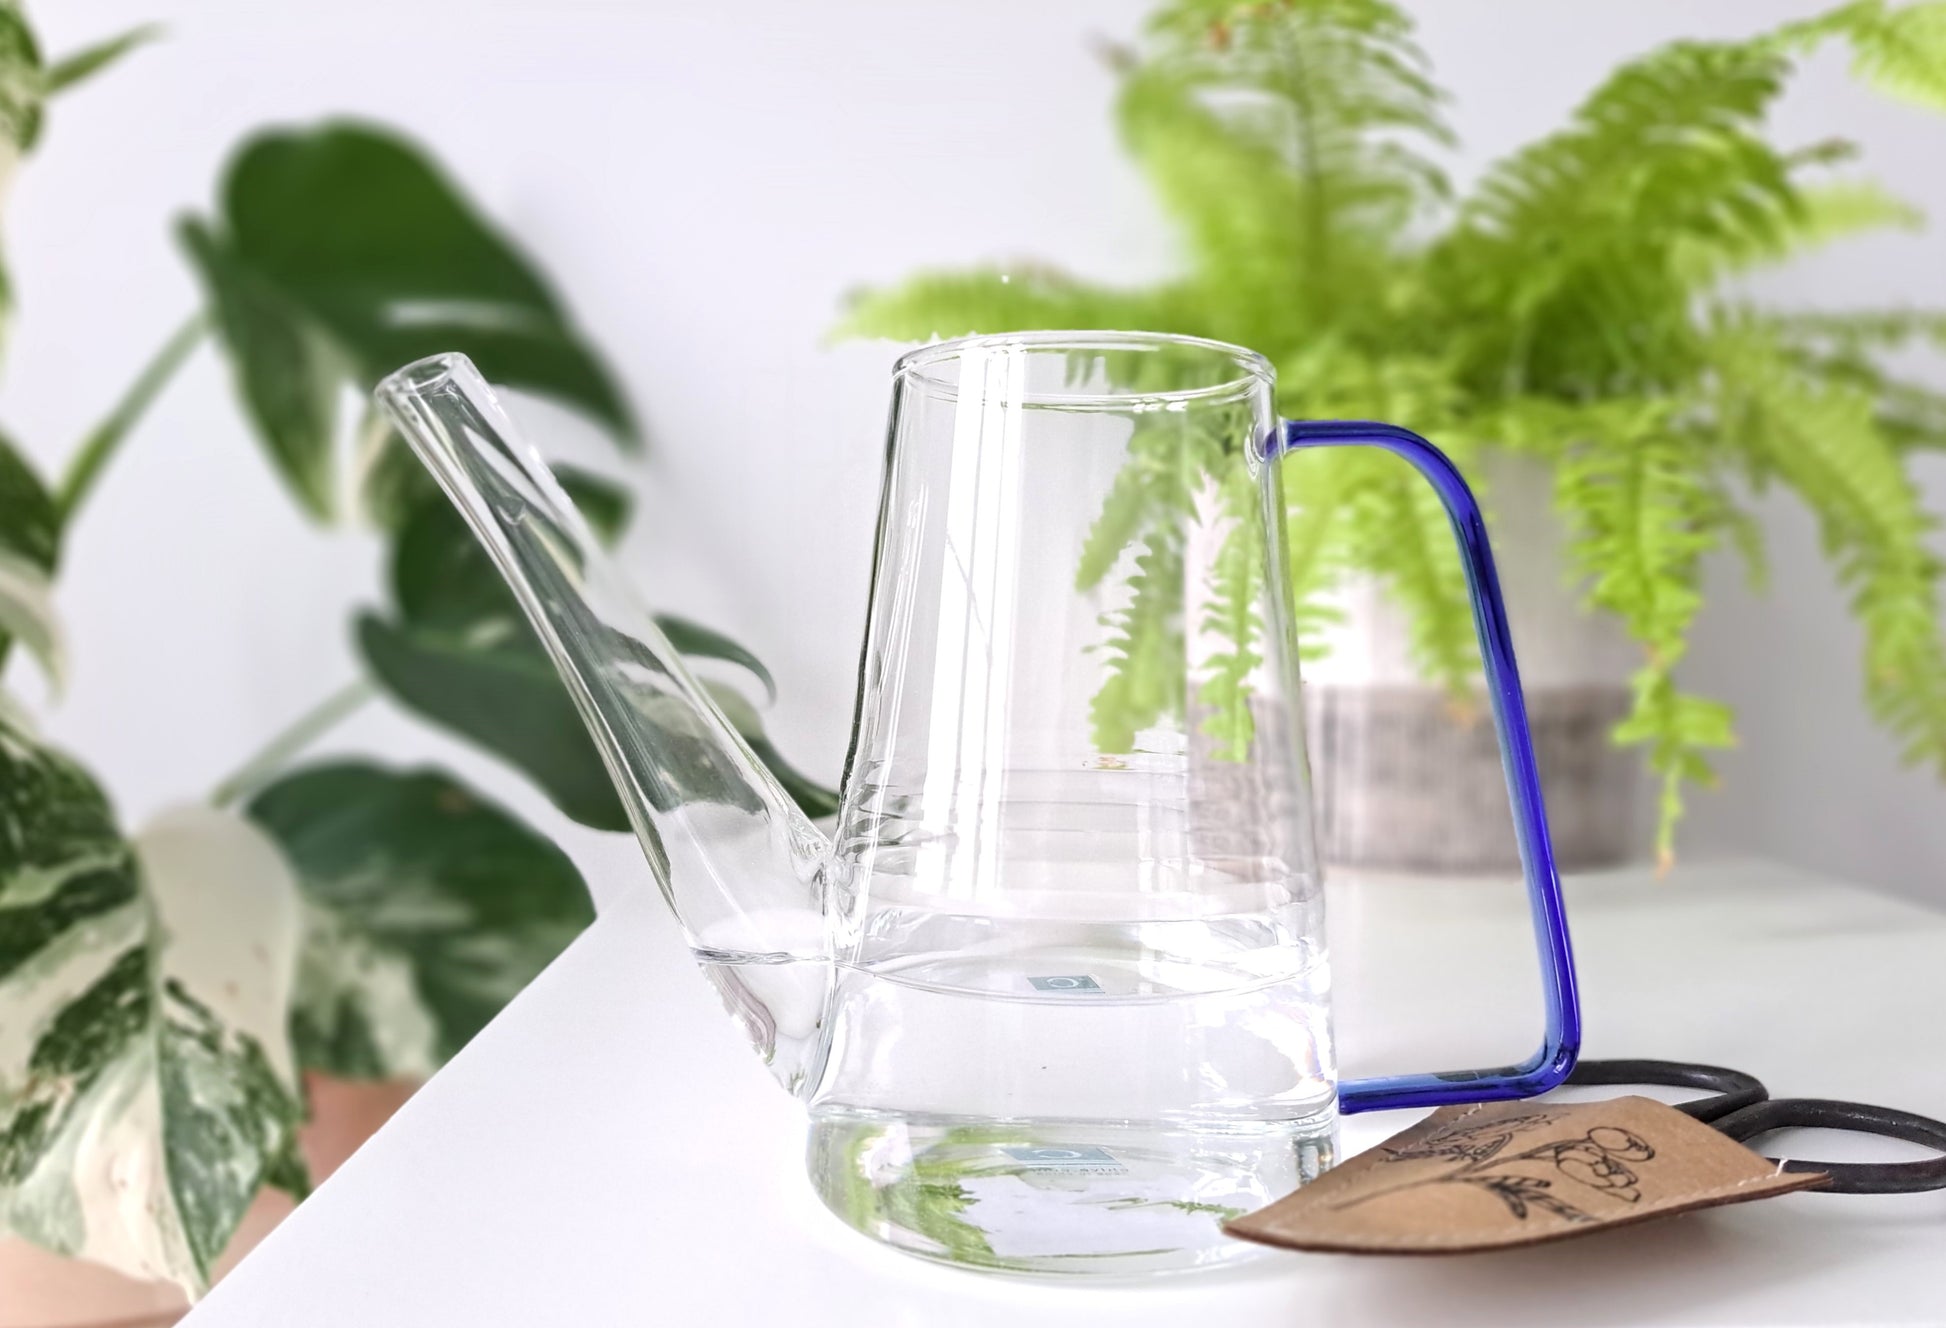 This extruded tube glass watering container is a perfect gift idea! Delicate and trendy, this water jug is great for getting into hard to reach spaces. Also makes a great vase for displaying fresh cut flowers. Comes with rustic metal snippers in the pouch.